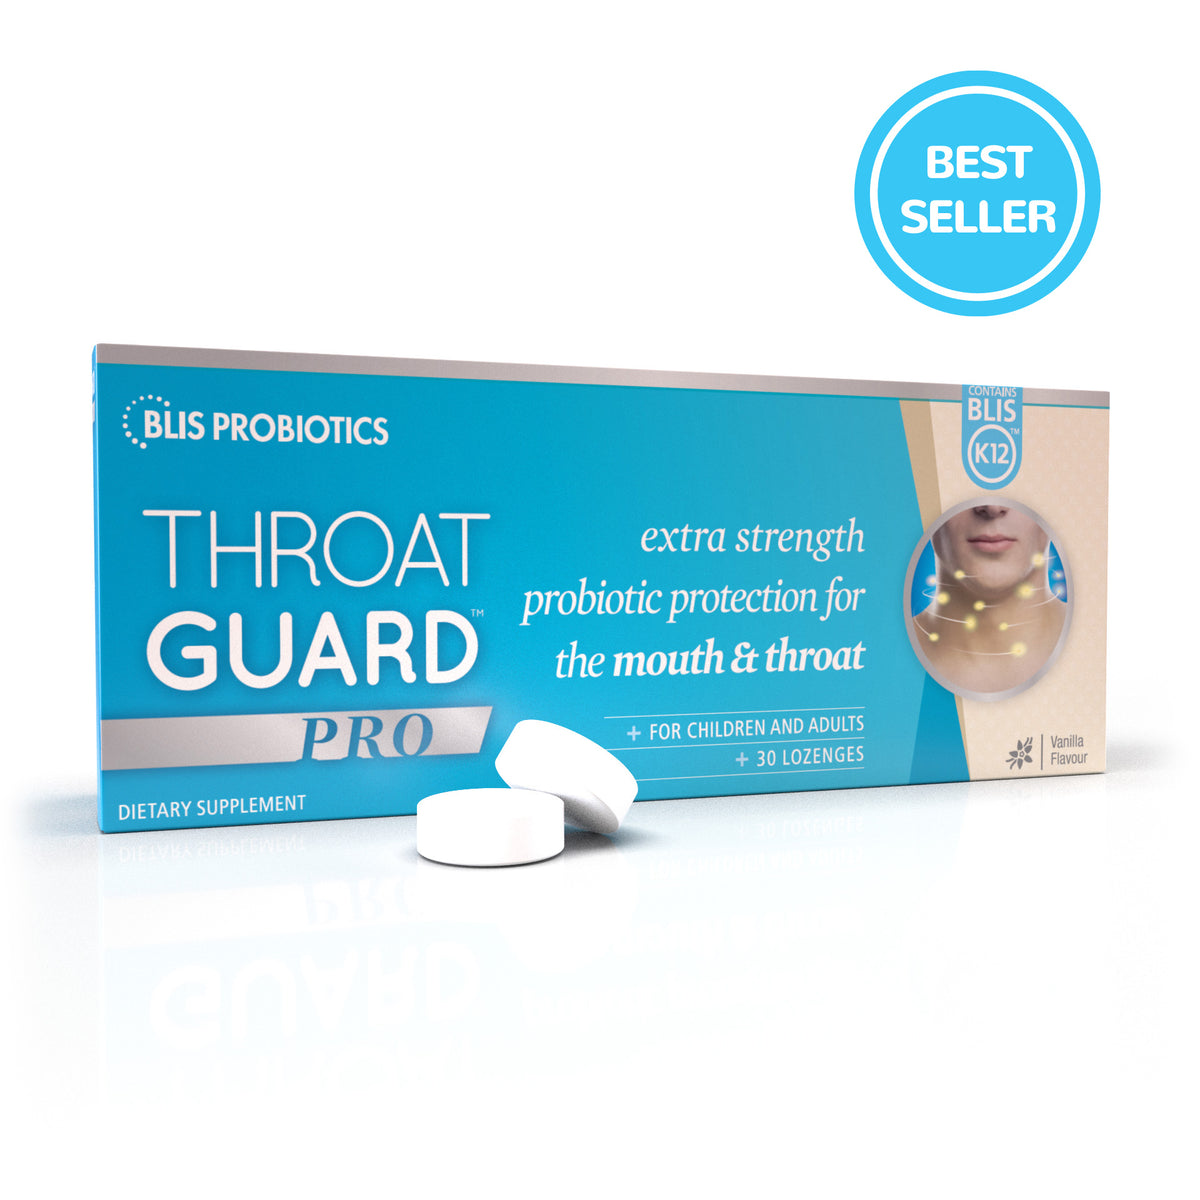 Image of Throat Guard Pro box and lozenges - extra strength probiotic protection for mouth & throat health. | Blis Probiotics